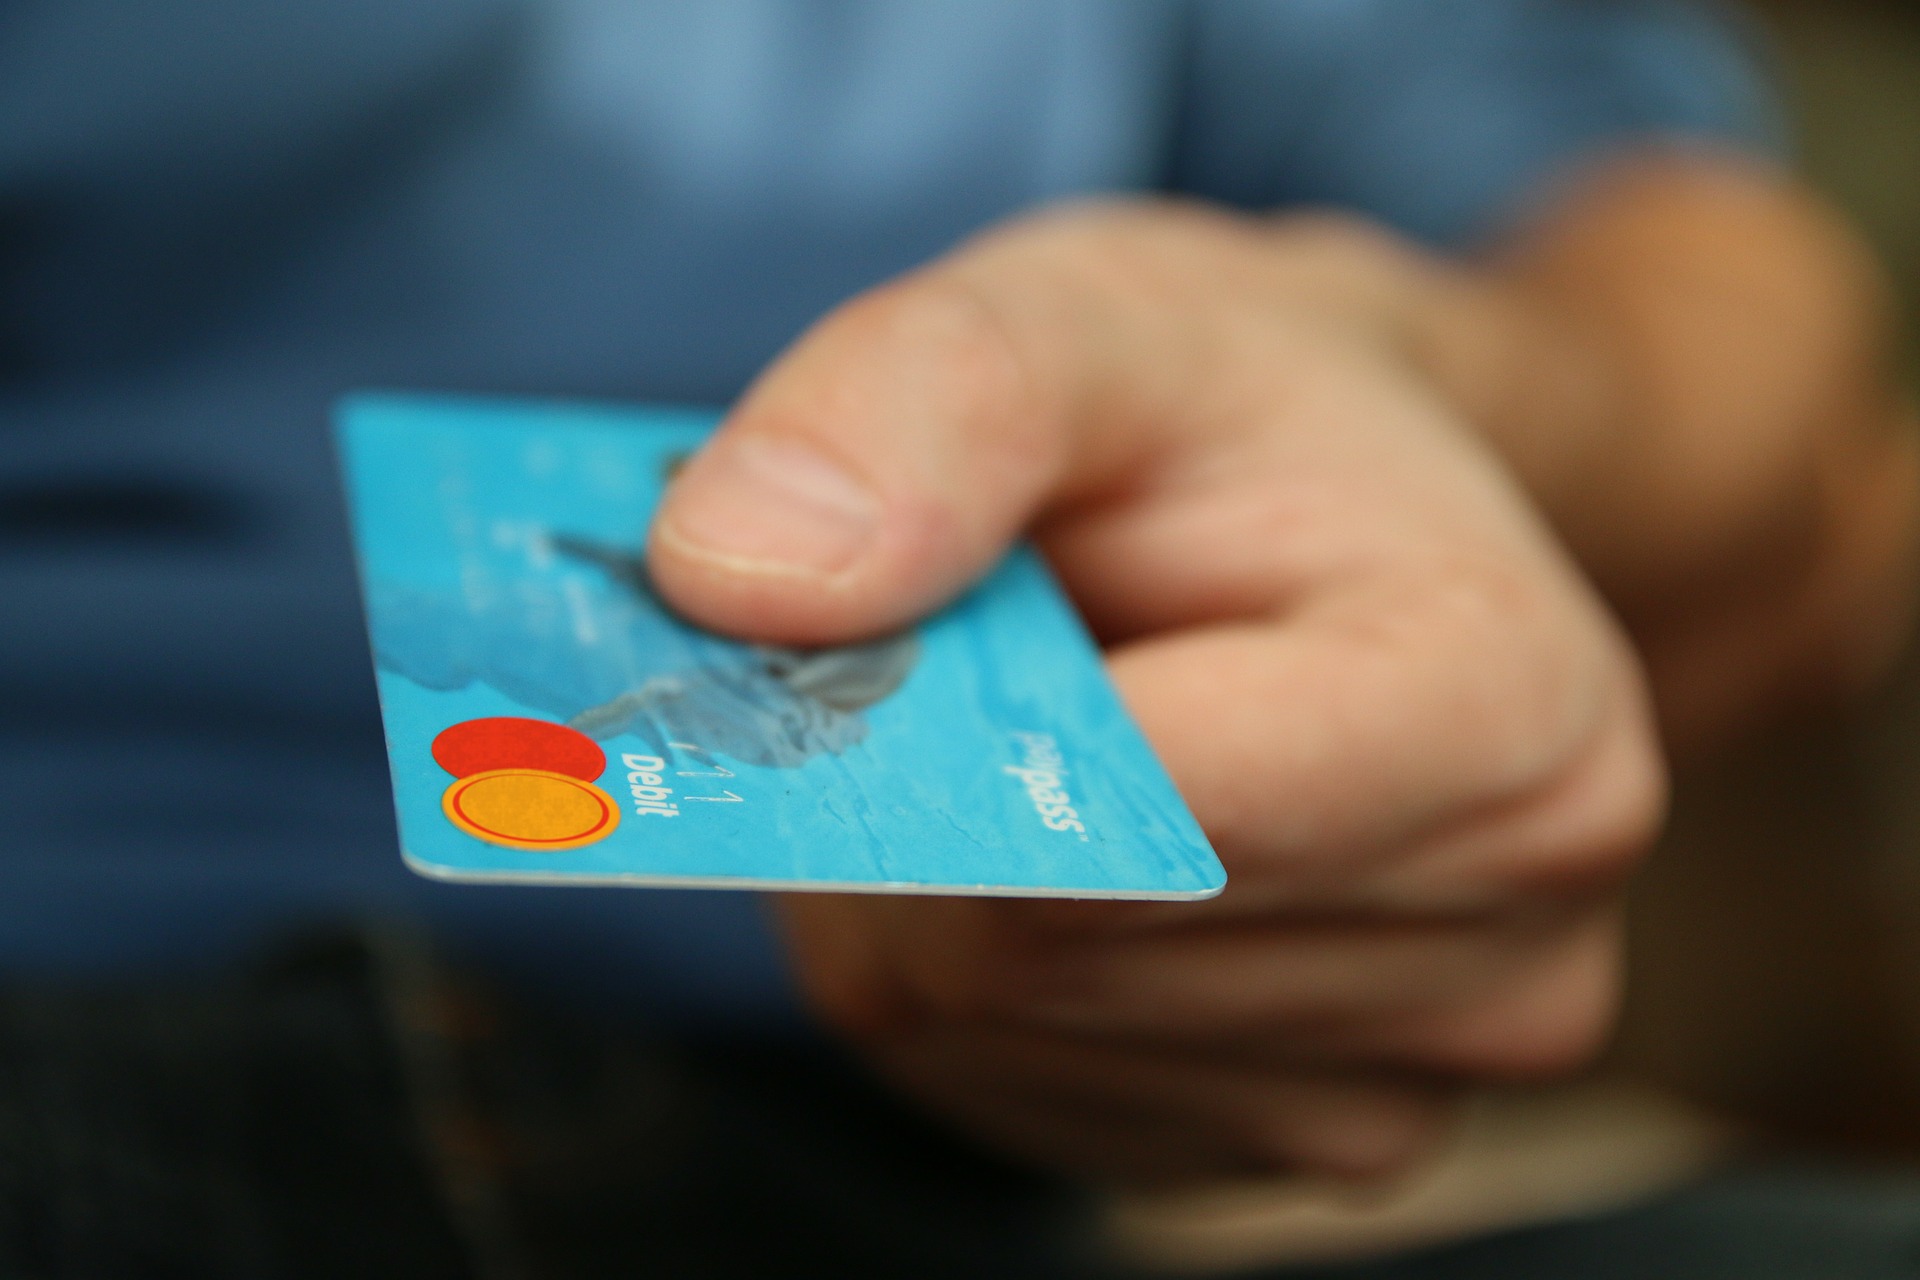 Photo of a credit card